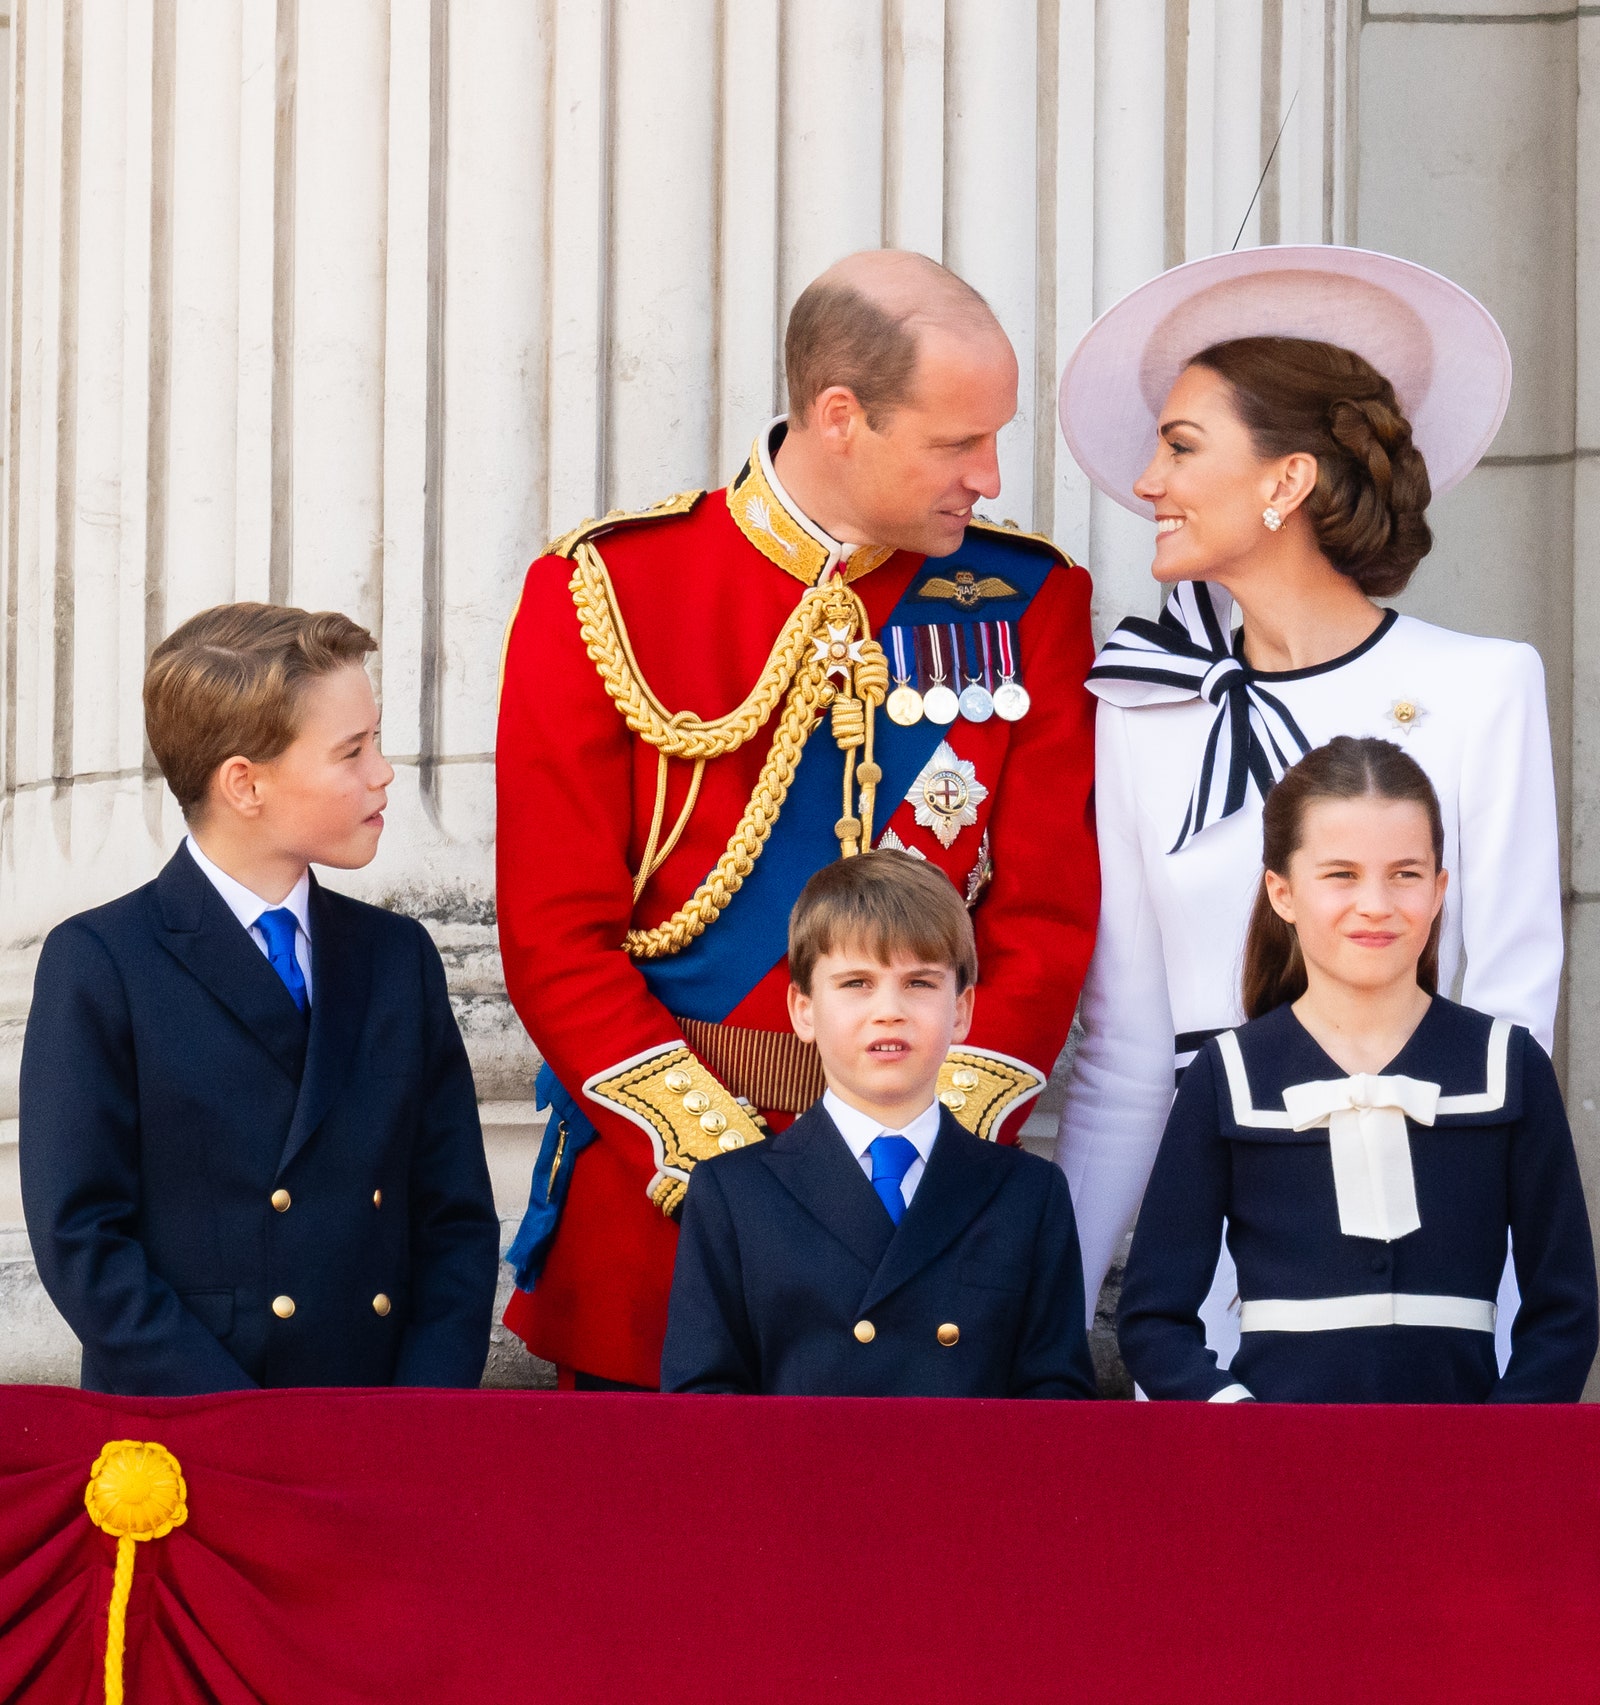 Image may contain Prince William Duke of Cambridge Person Child Teen Accessories Formal Wear Tie Officer and People